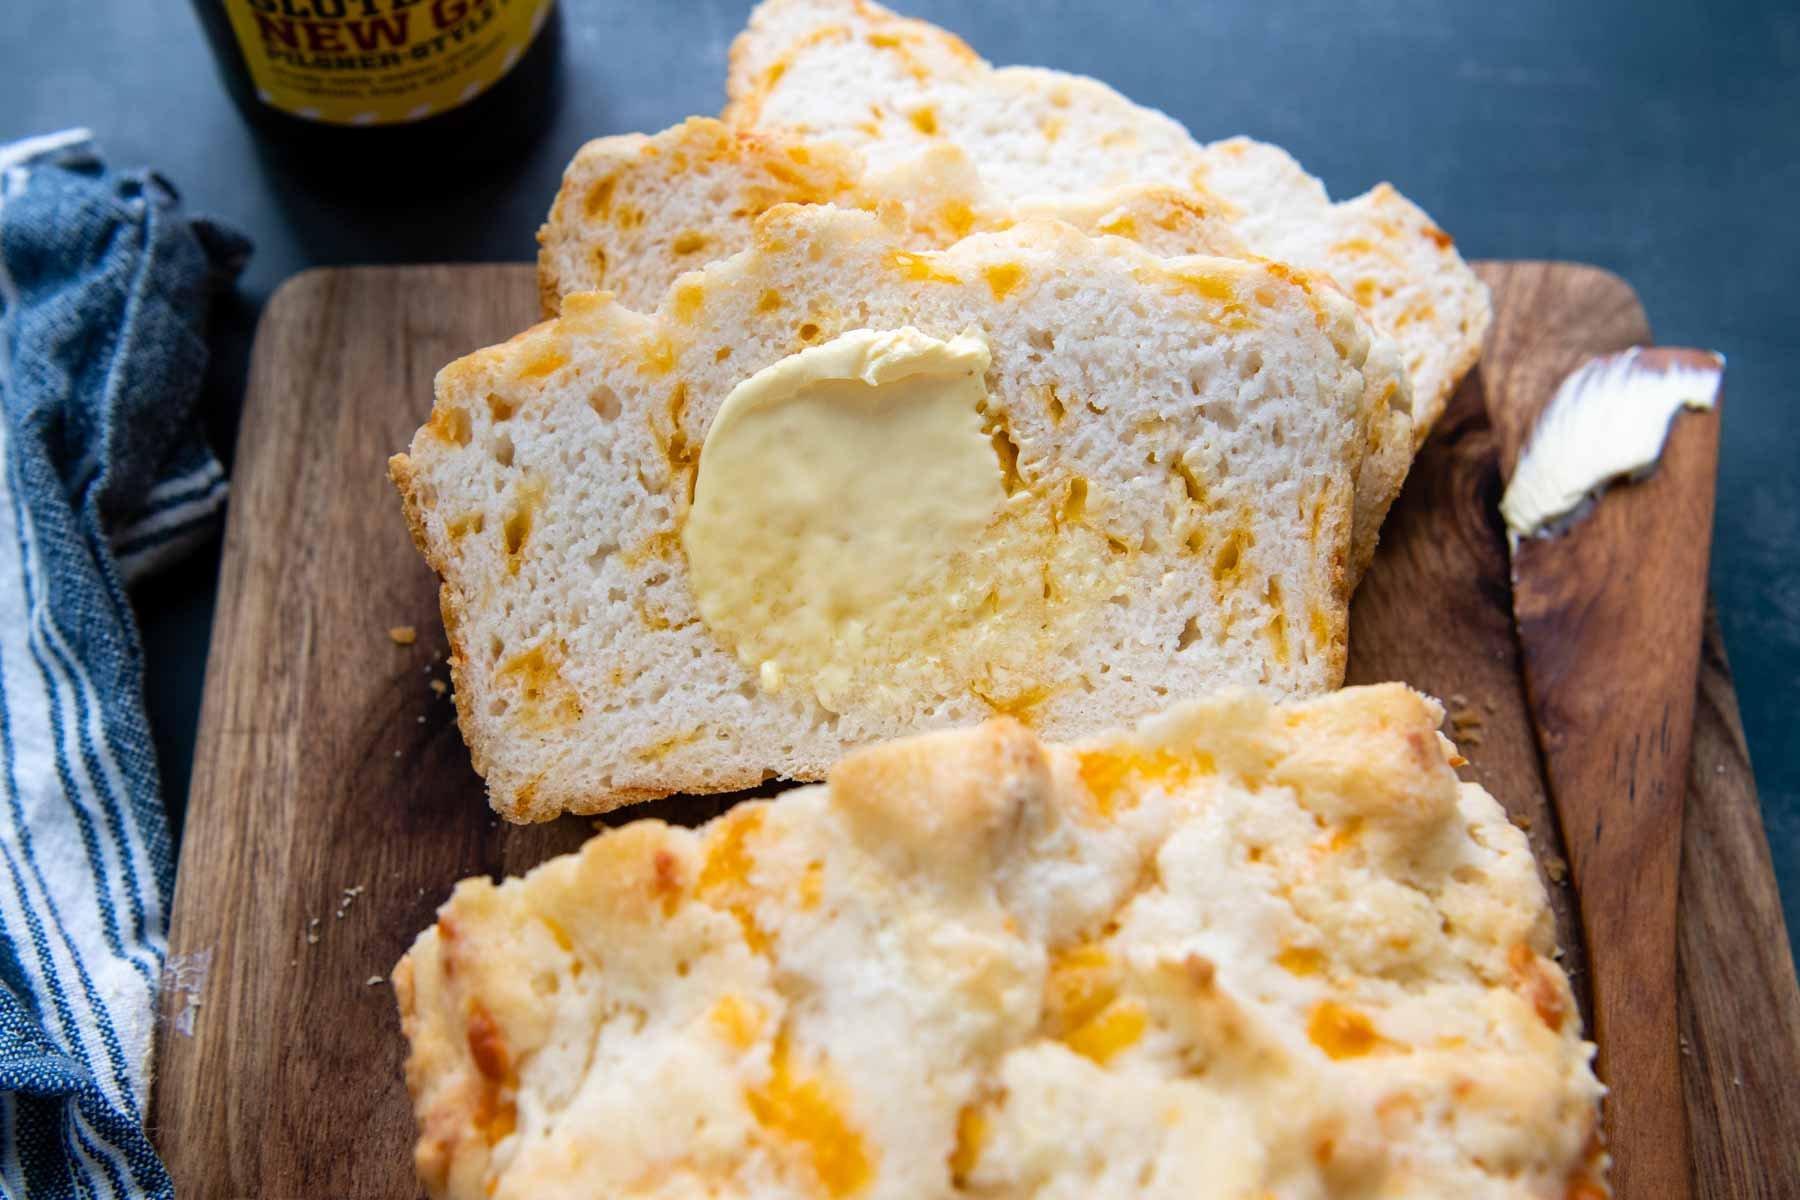 sliced beer bread with melting butter spread on.